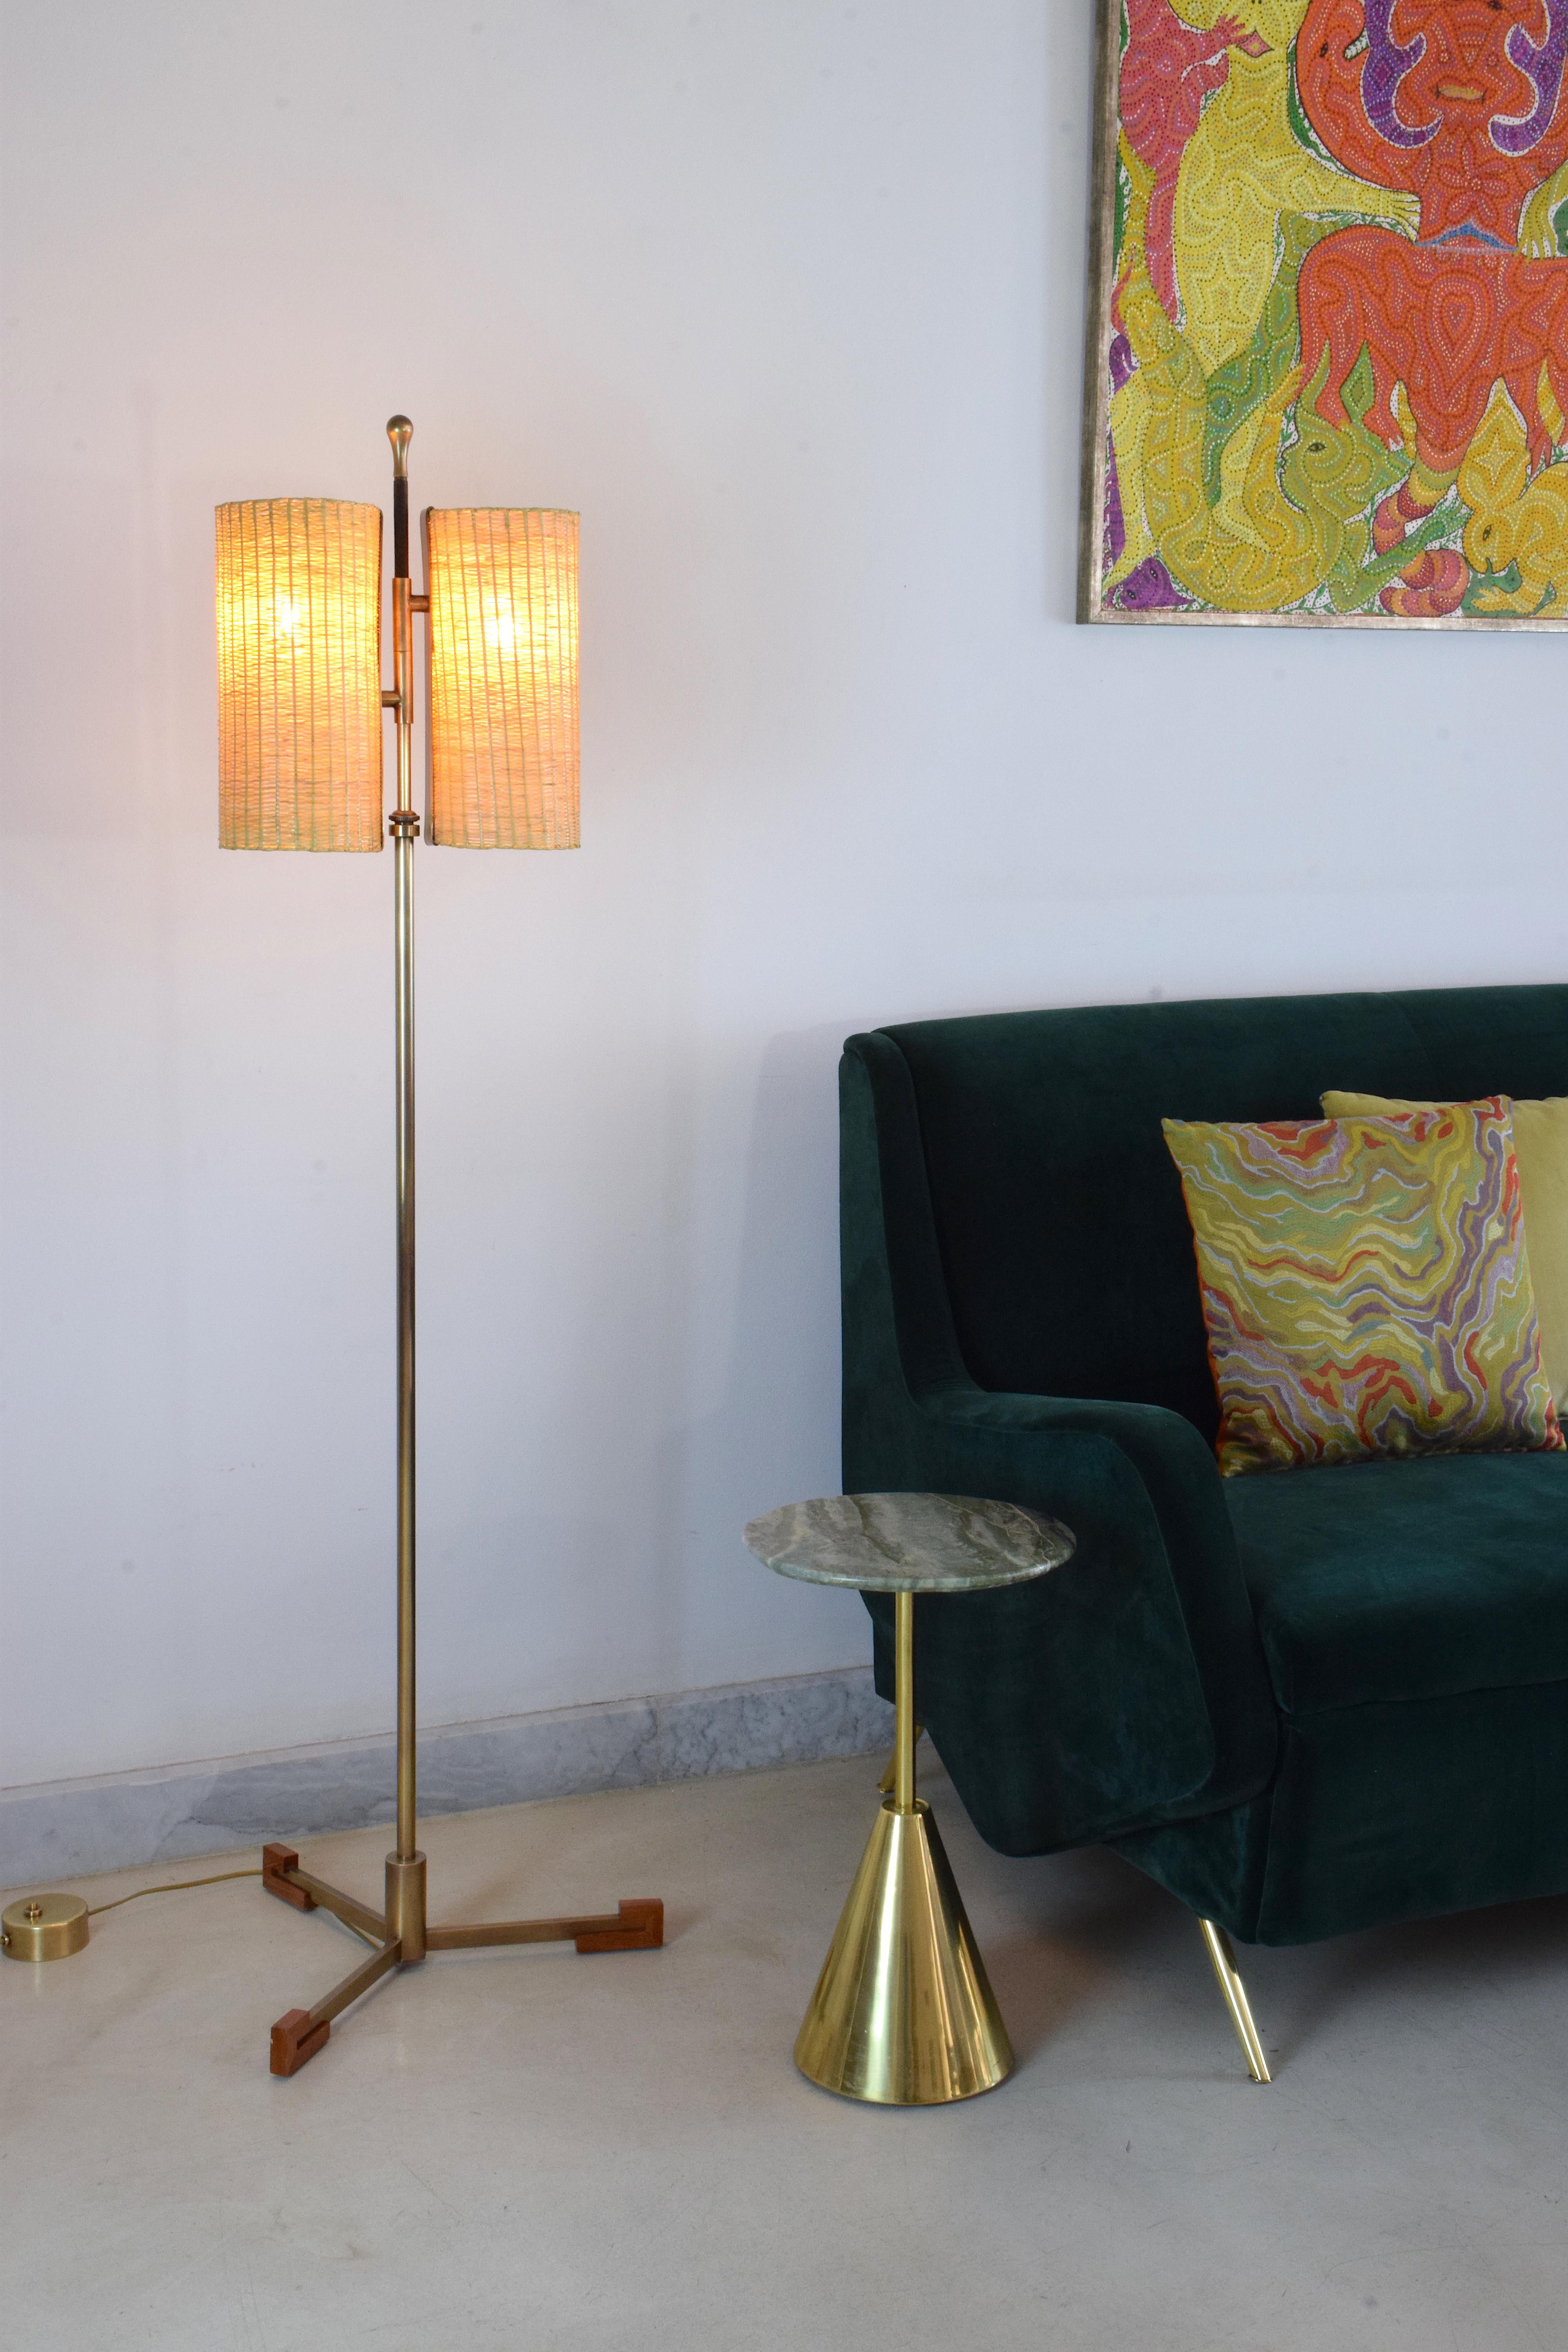 Contemporary handcrafted floor lamp composed of a solid polished brass structure which adjusts in height, a leather detail hand-pleated by artisan saddle makers, a walnut tripod base, and two handwoven wicker cylinder lampshades. 

Flow